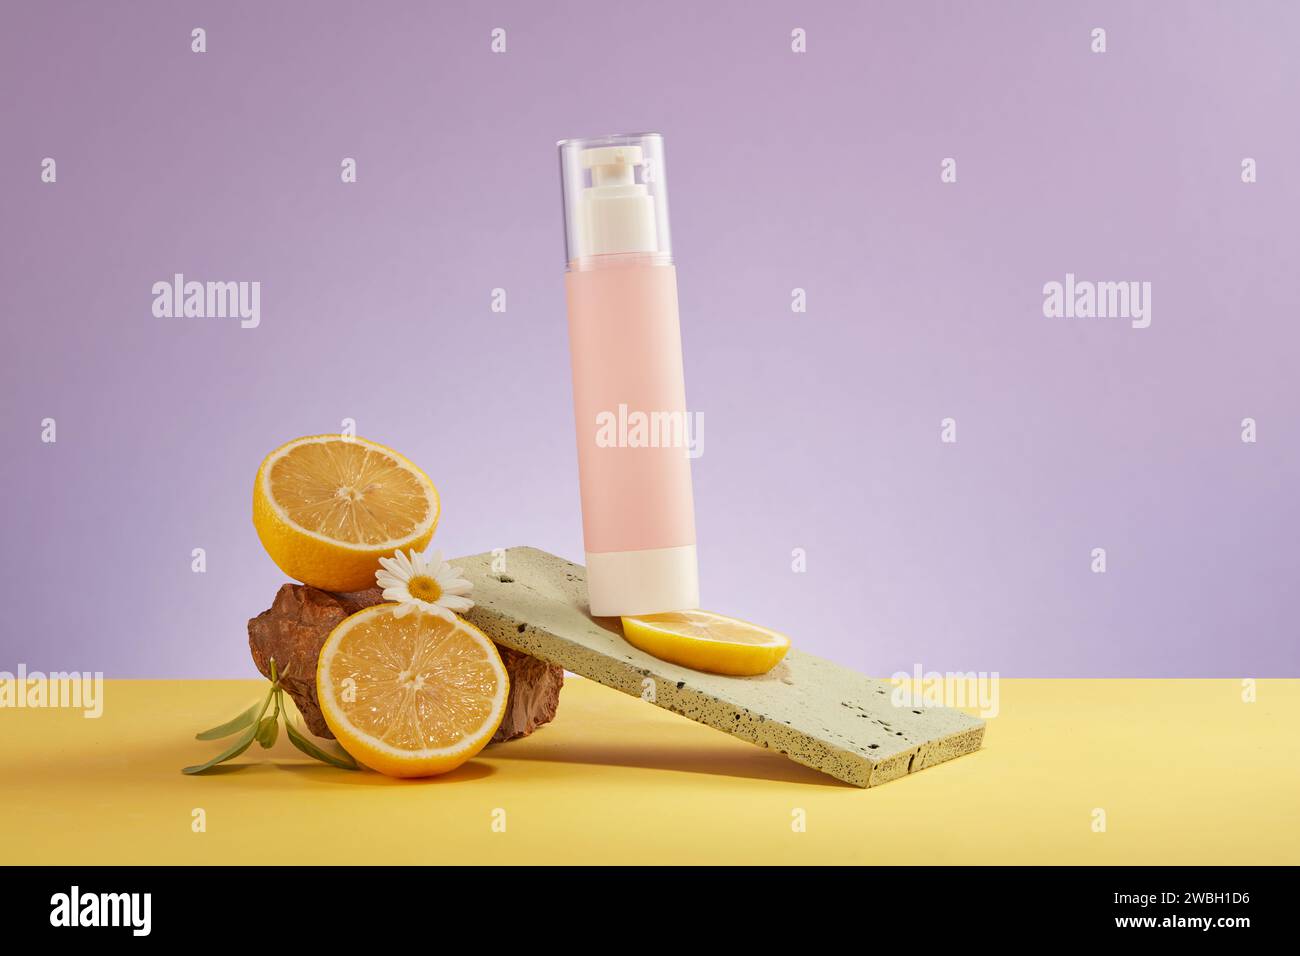 Pink bottle mockup for cosmetic, half of lemon and stone displayed on purple background. Lemon is high in vitamin c which boosts collagen and improves Stock Photo